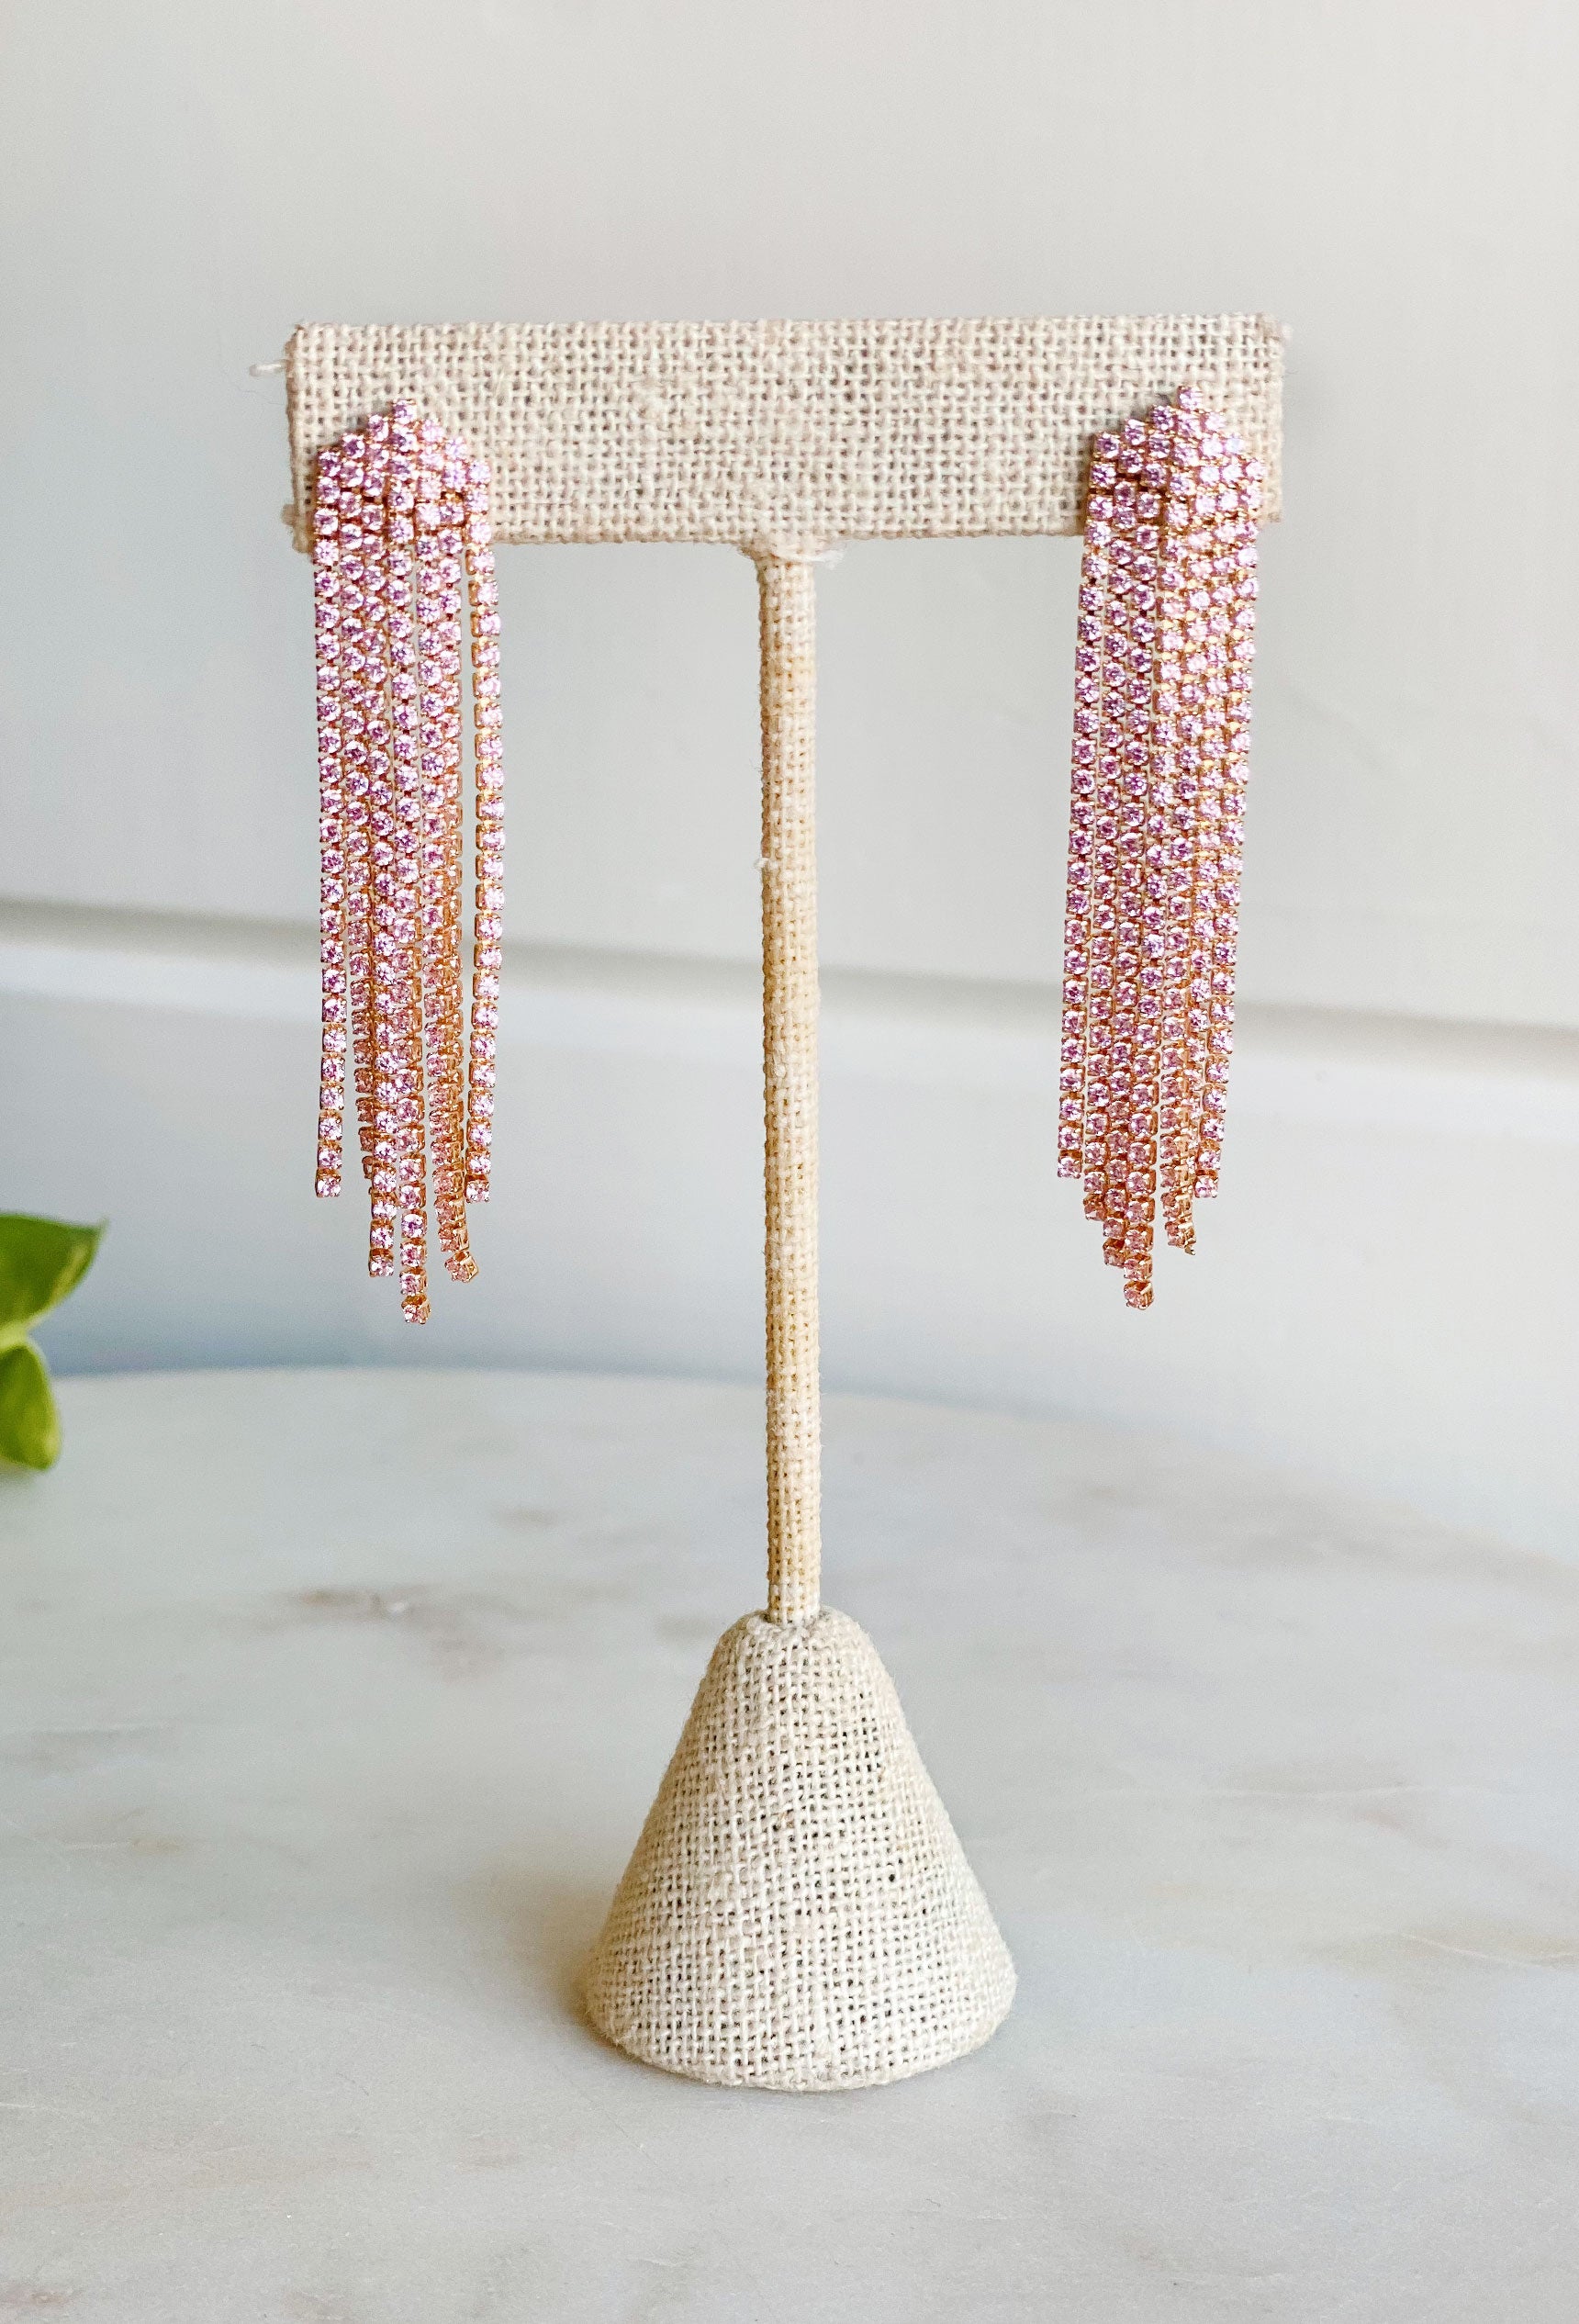 Dazzle Them Statement Earrings, pink pave crystals, post back drop earrings